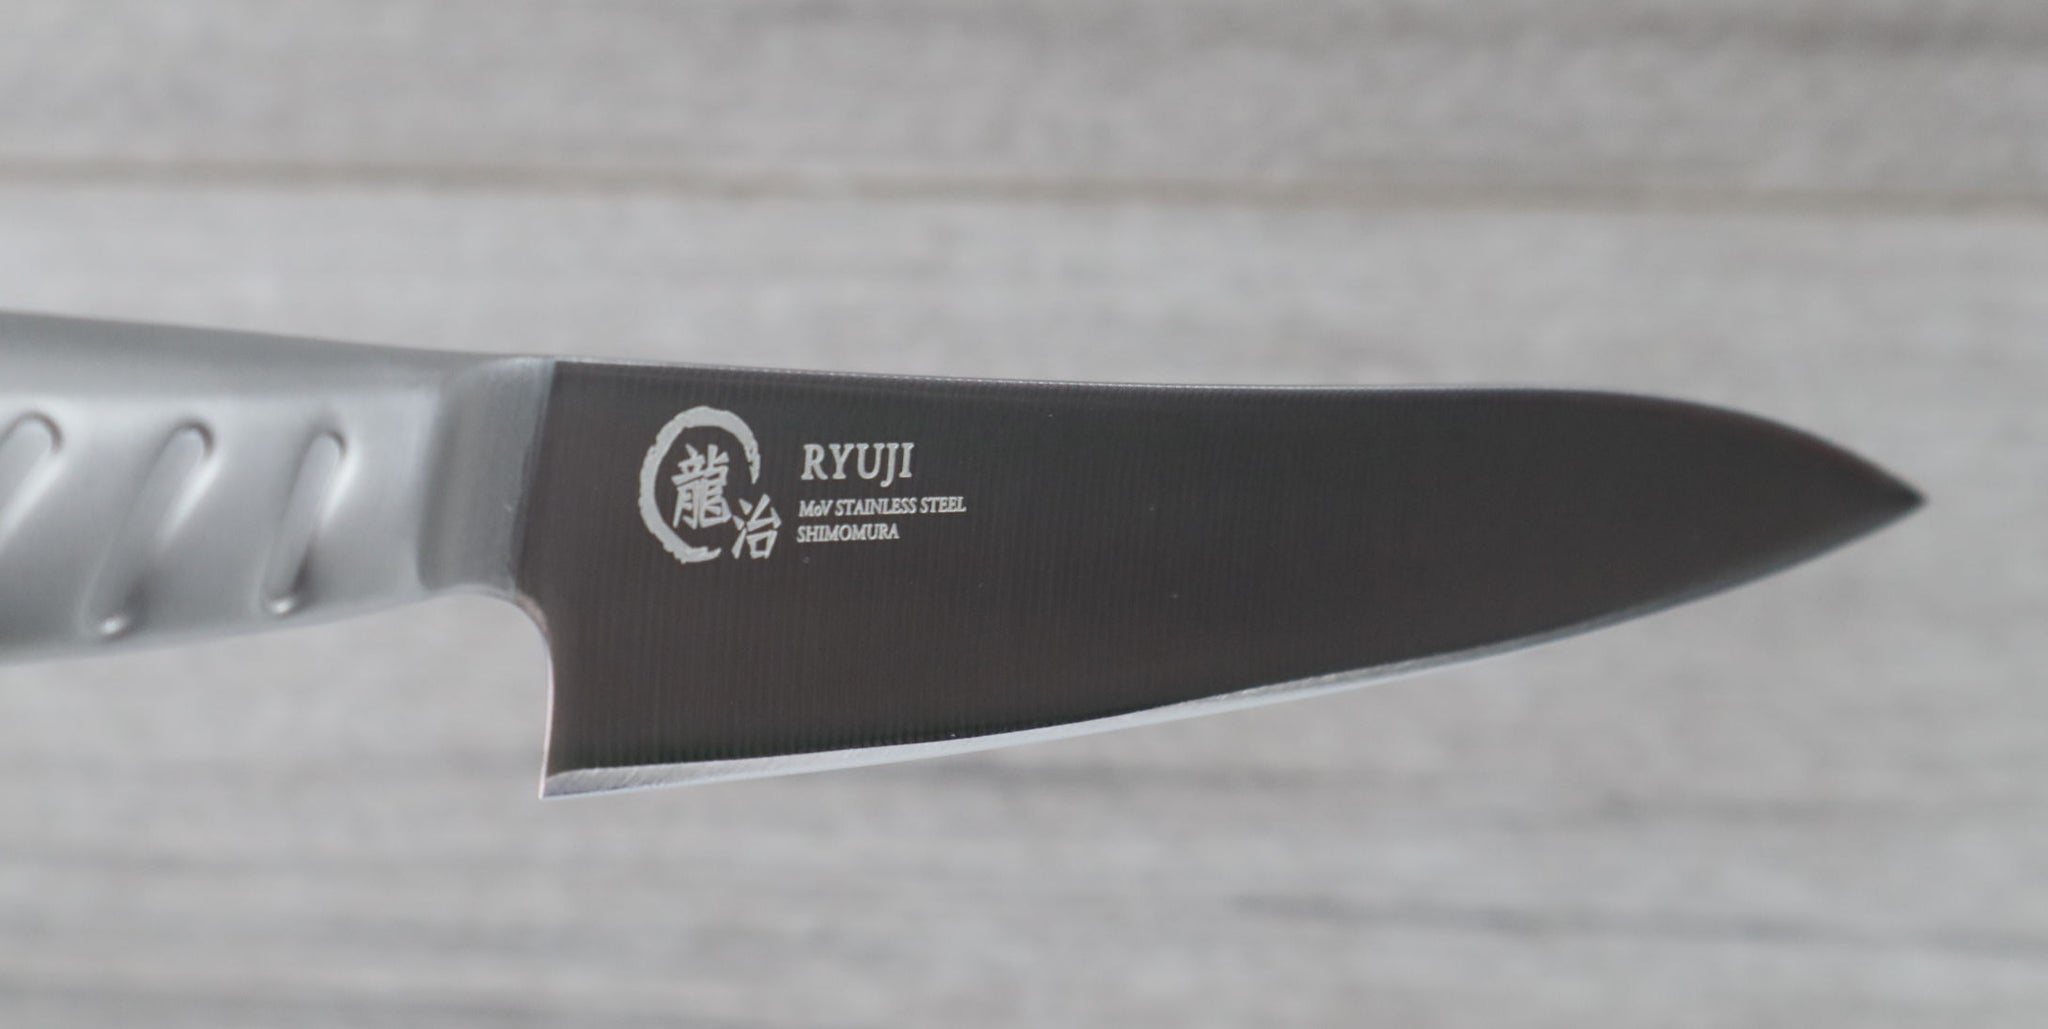 Ryuji All Stainless-Steel Petty (Utility) Knife 150mm